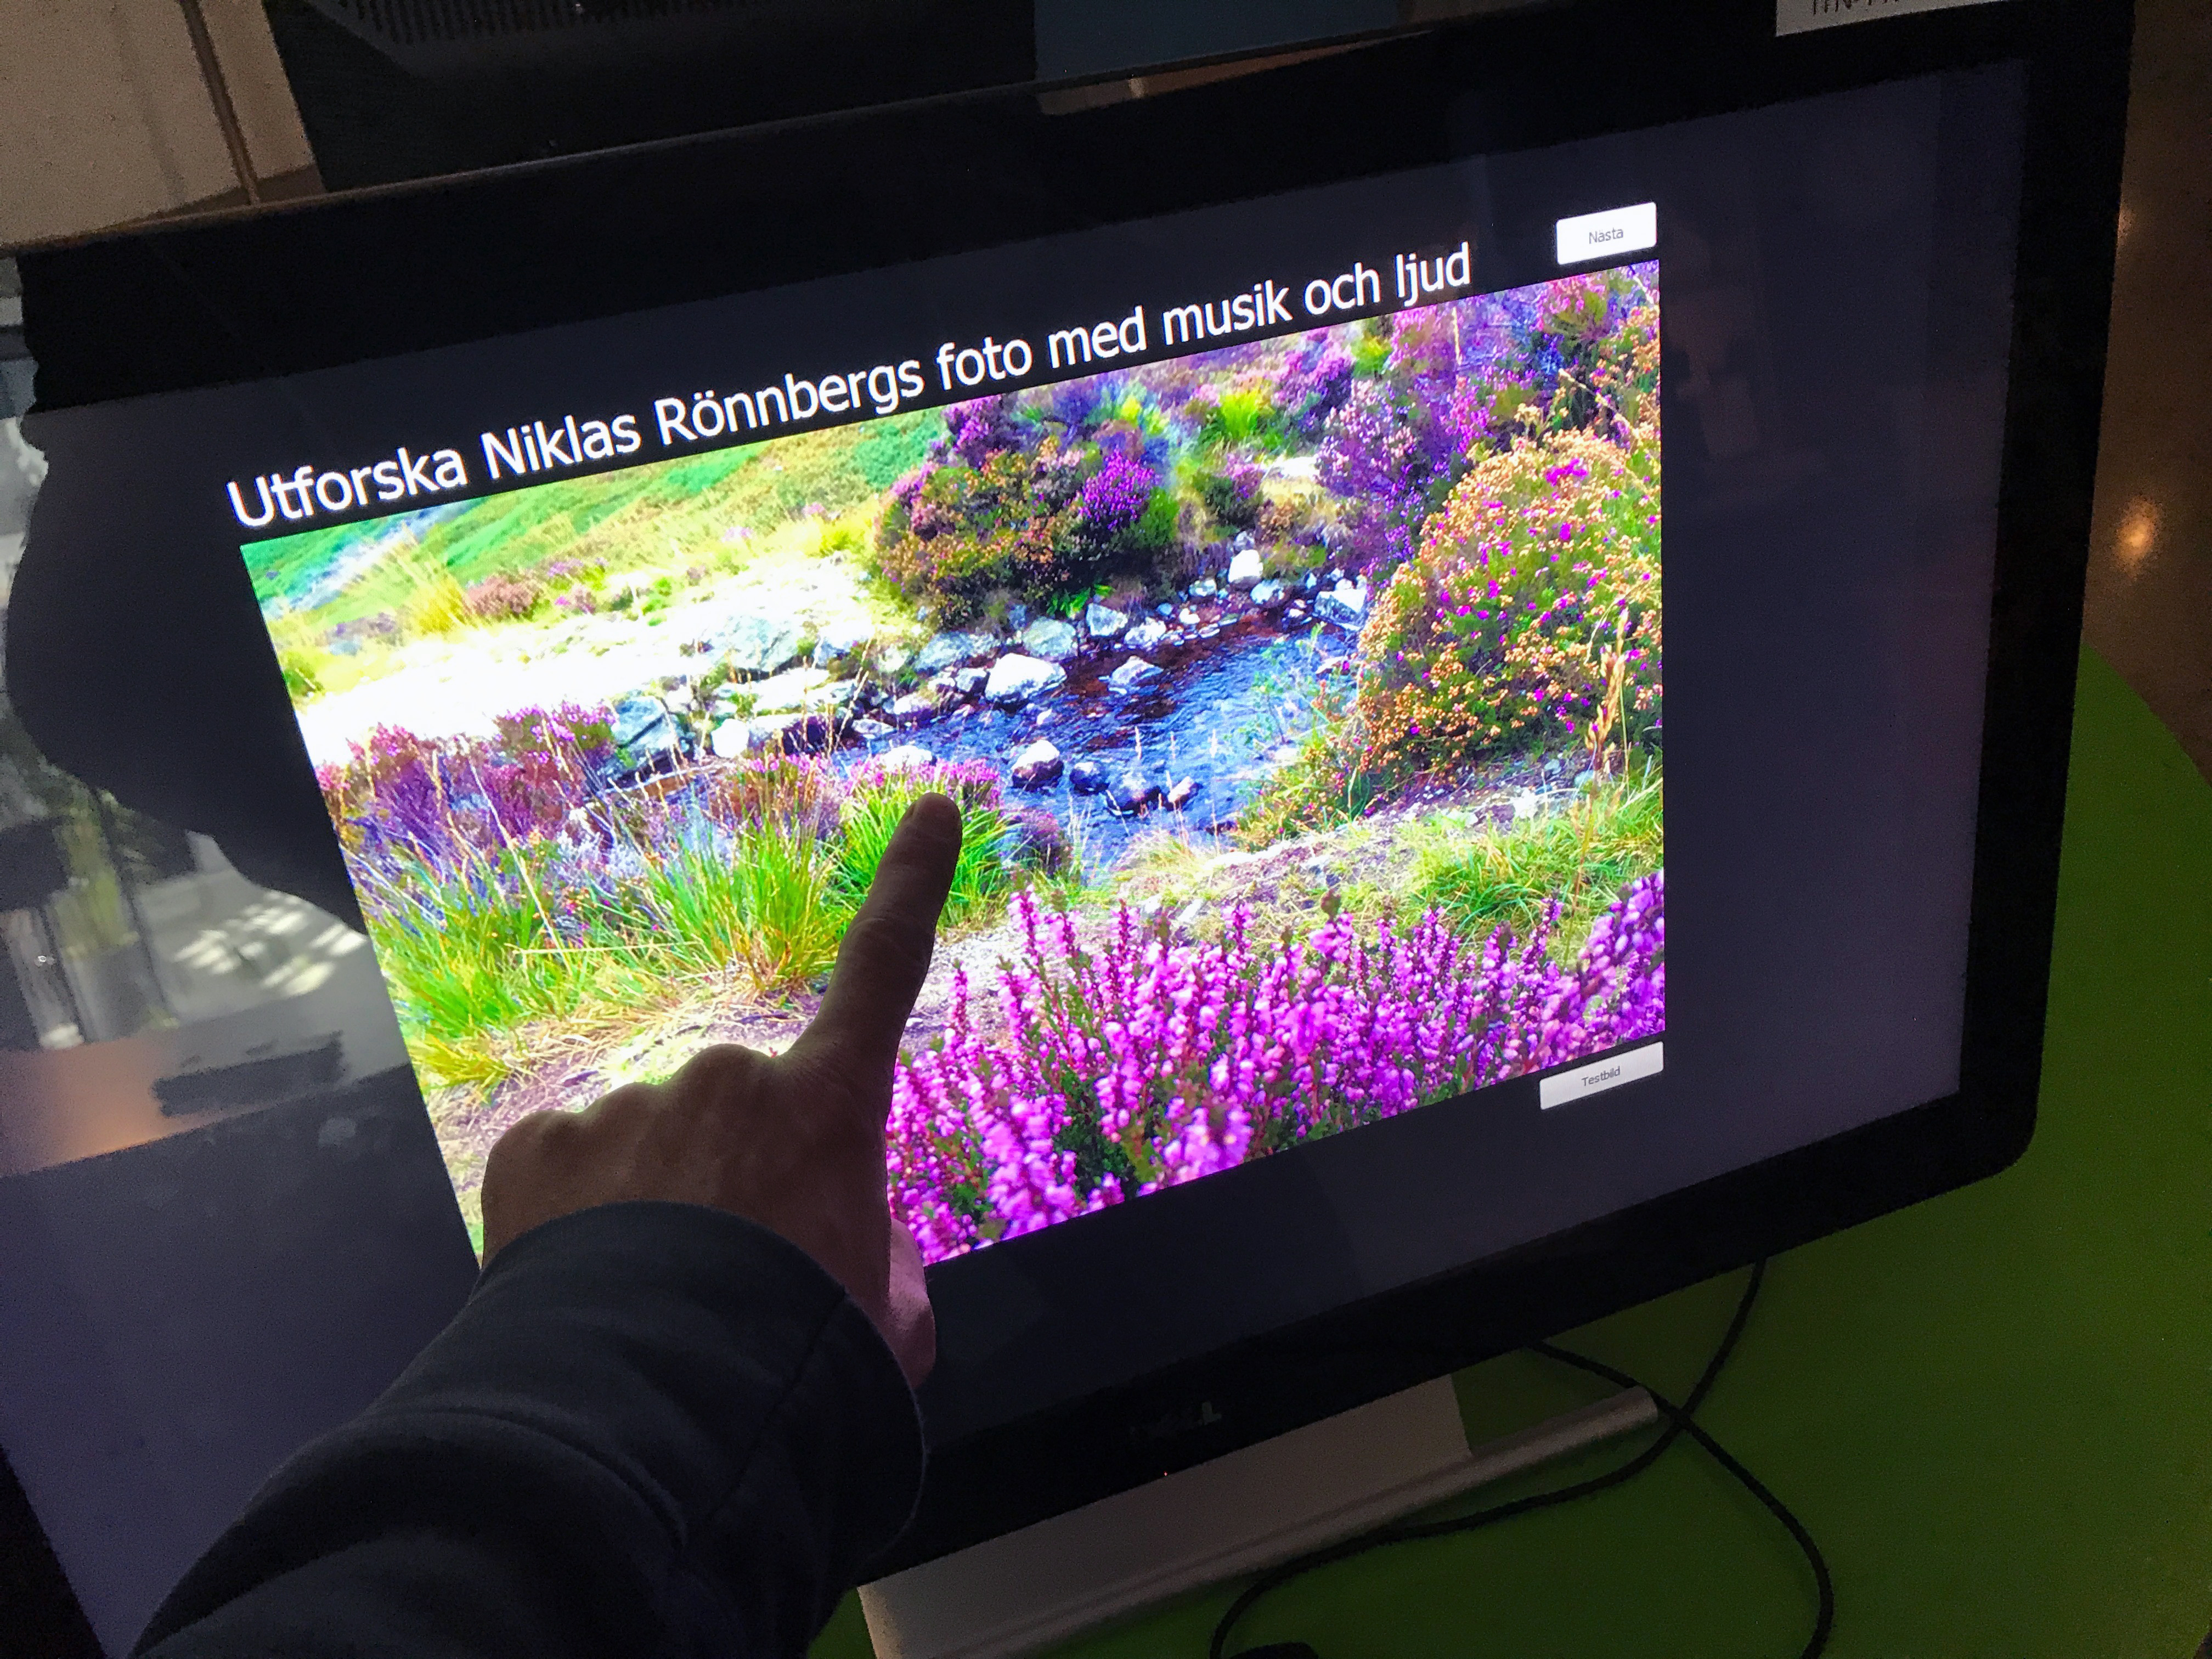 Finger pointing at a nature image on a computer display.